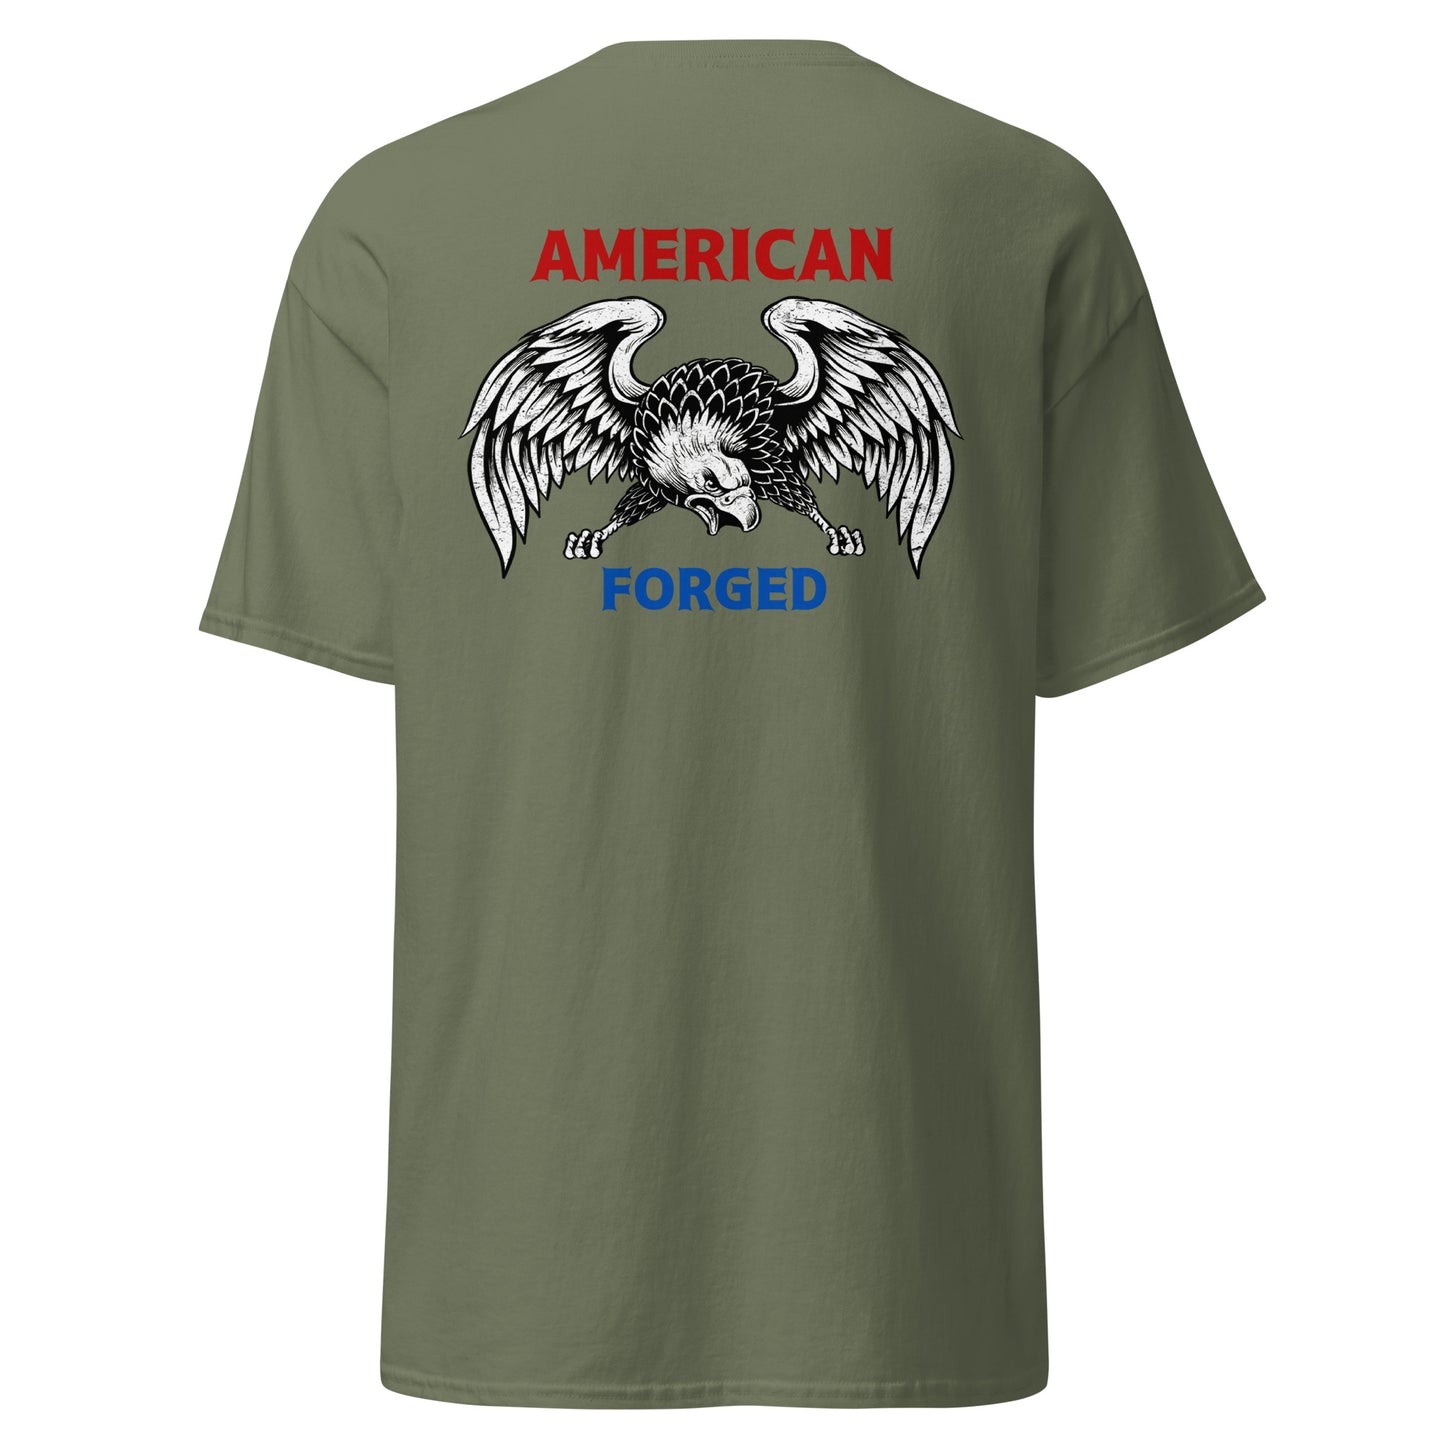 American Forged T-shirt